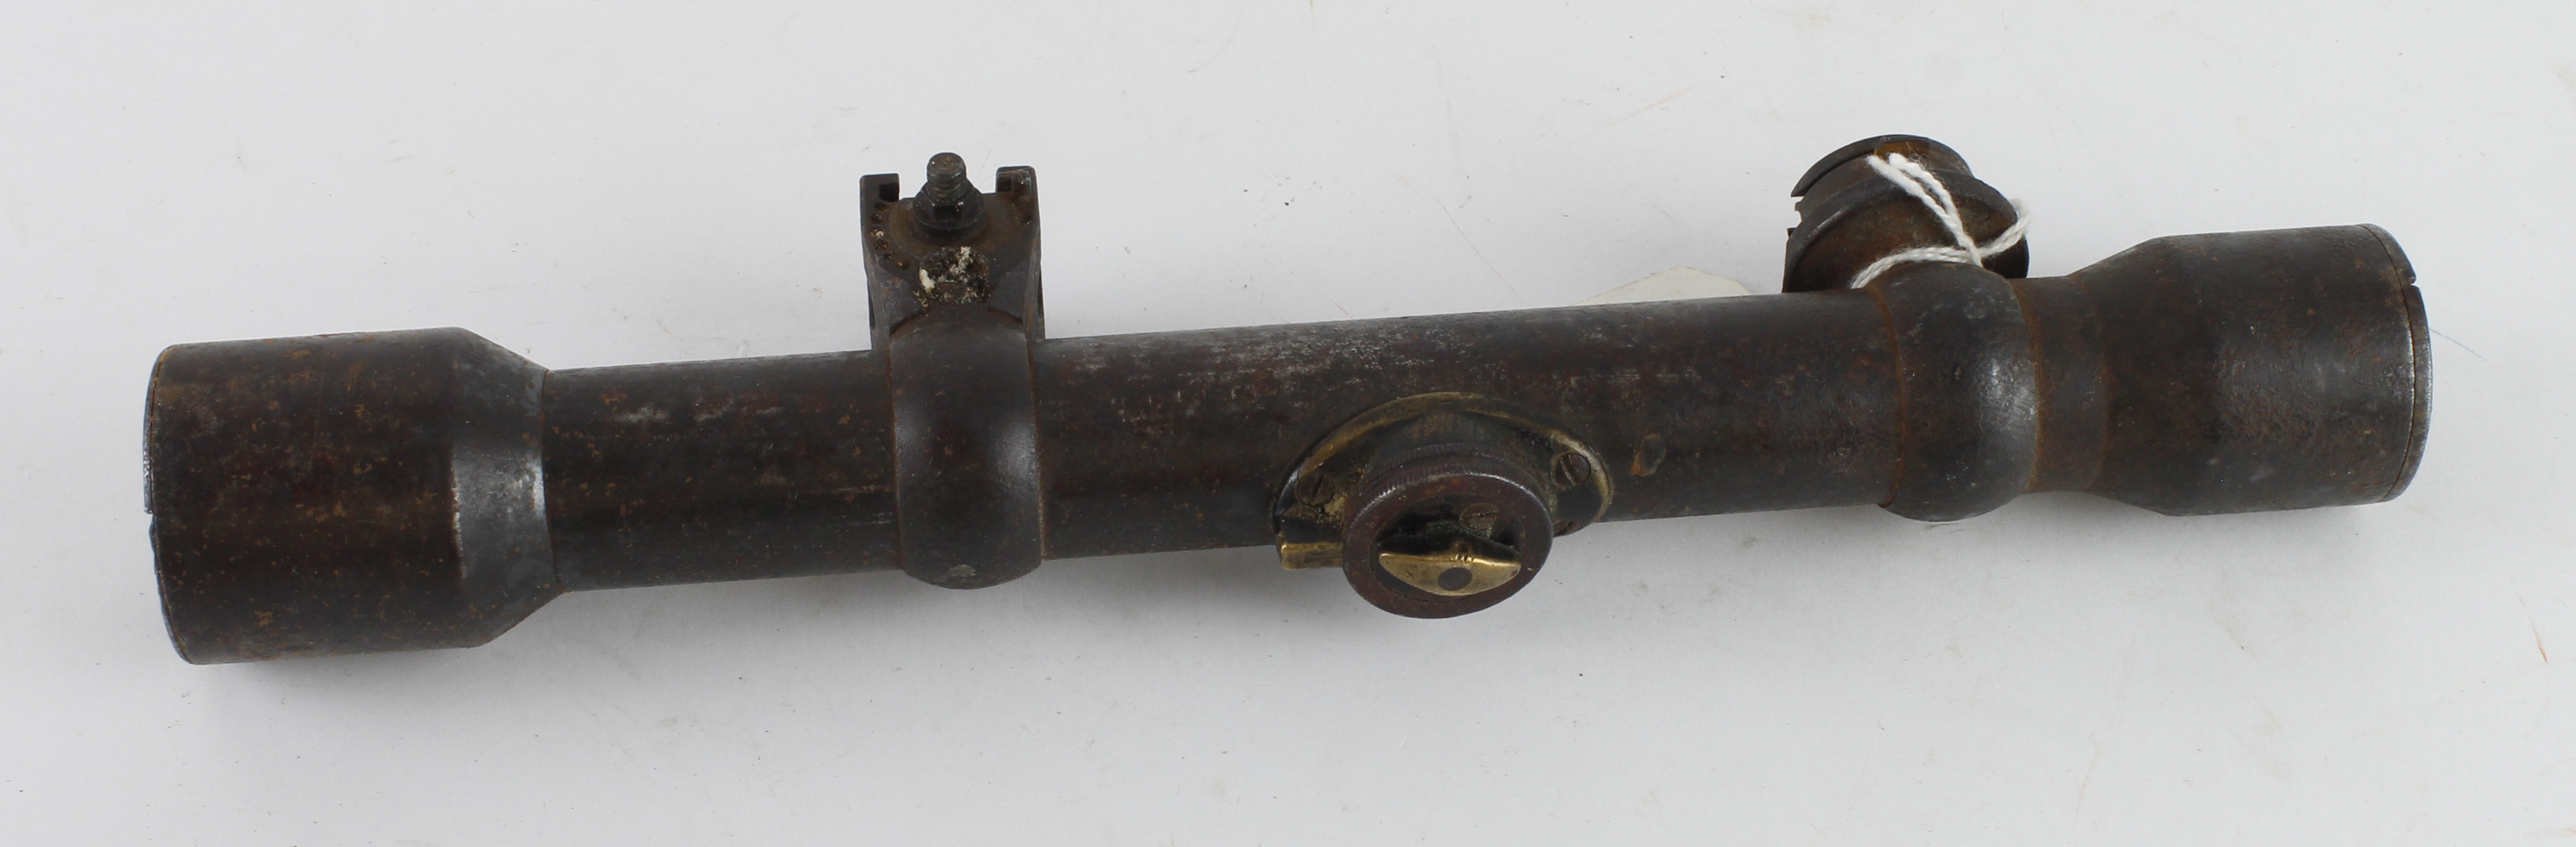 German WW2 sniper scope with various stampings to the body and Berlin makers stamp.